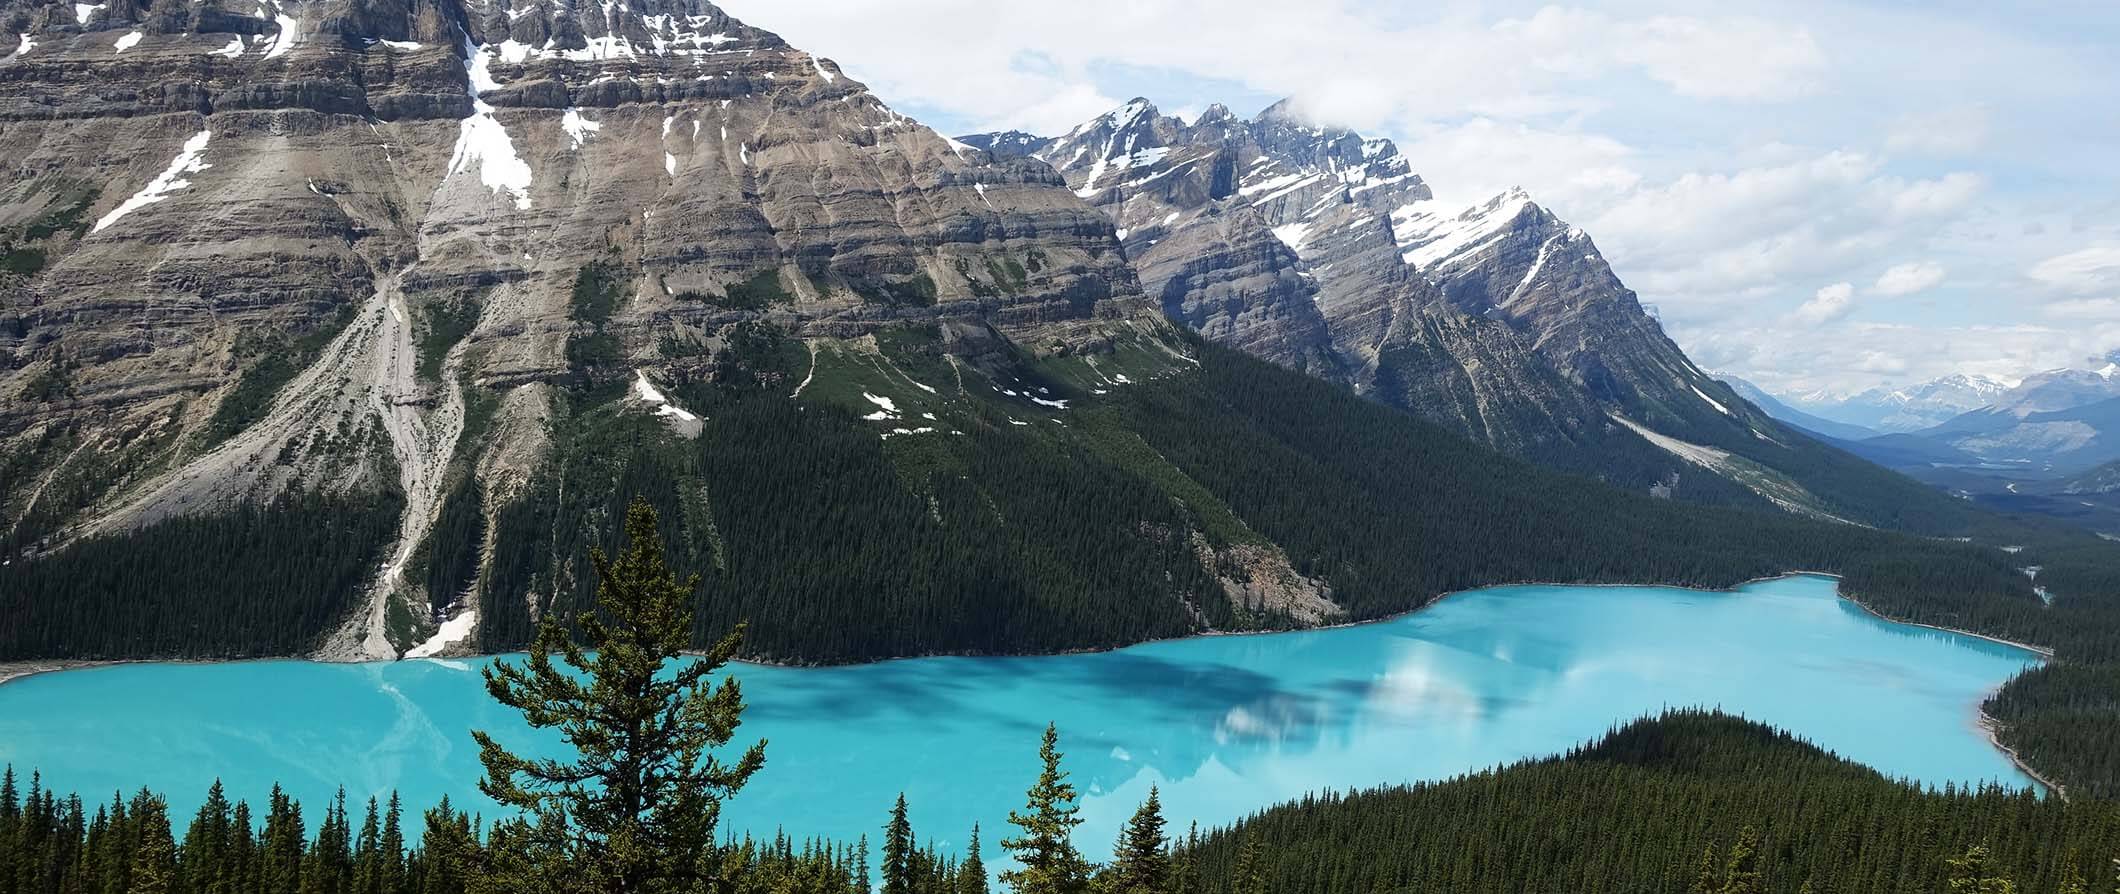 Canada Travel Guide: What to See, Do, Costs, & Ways to Save